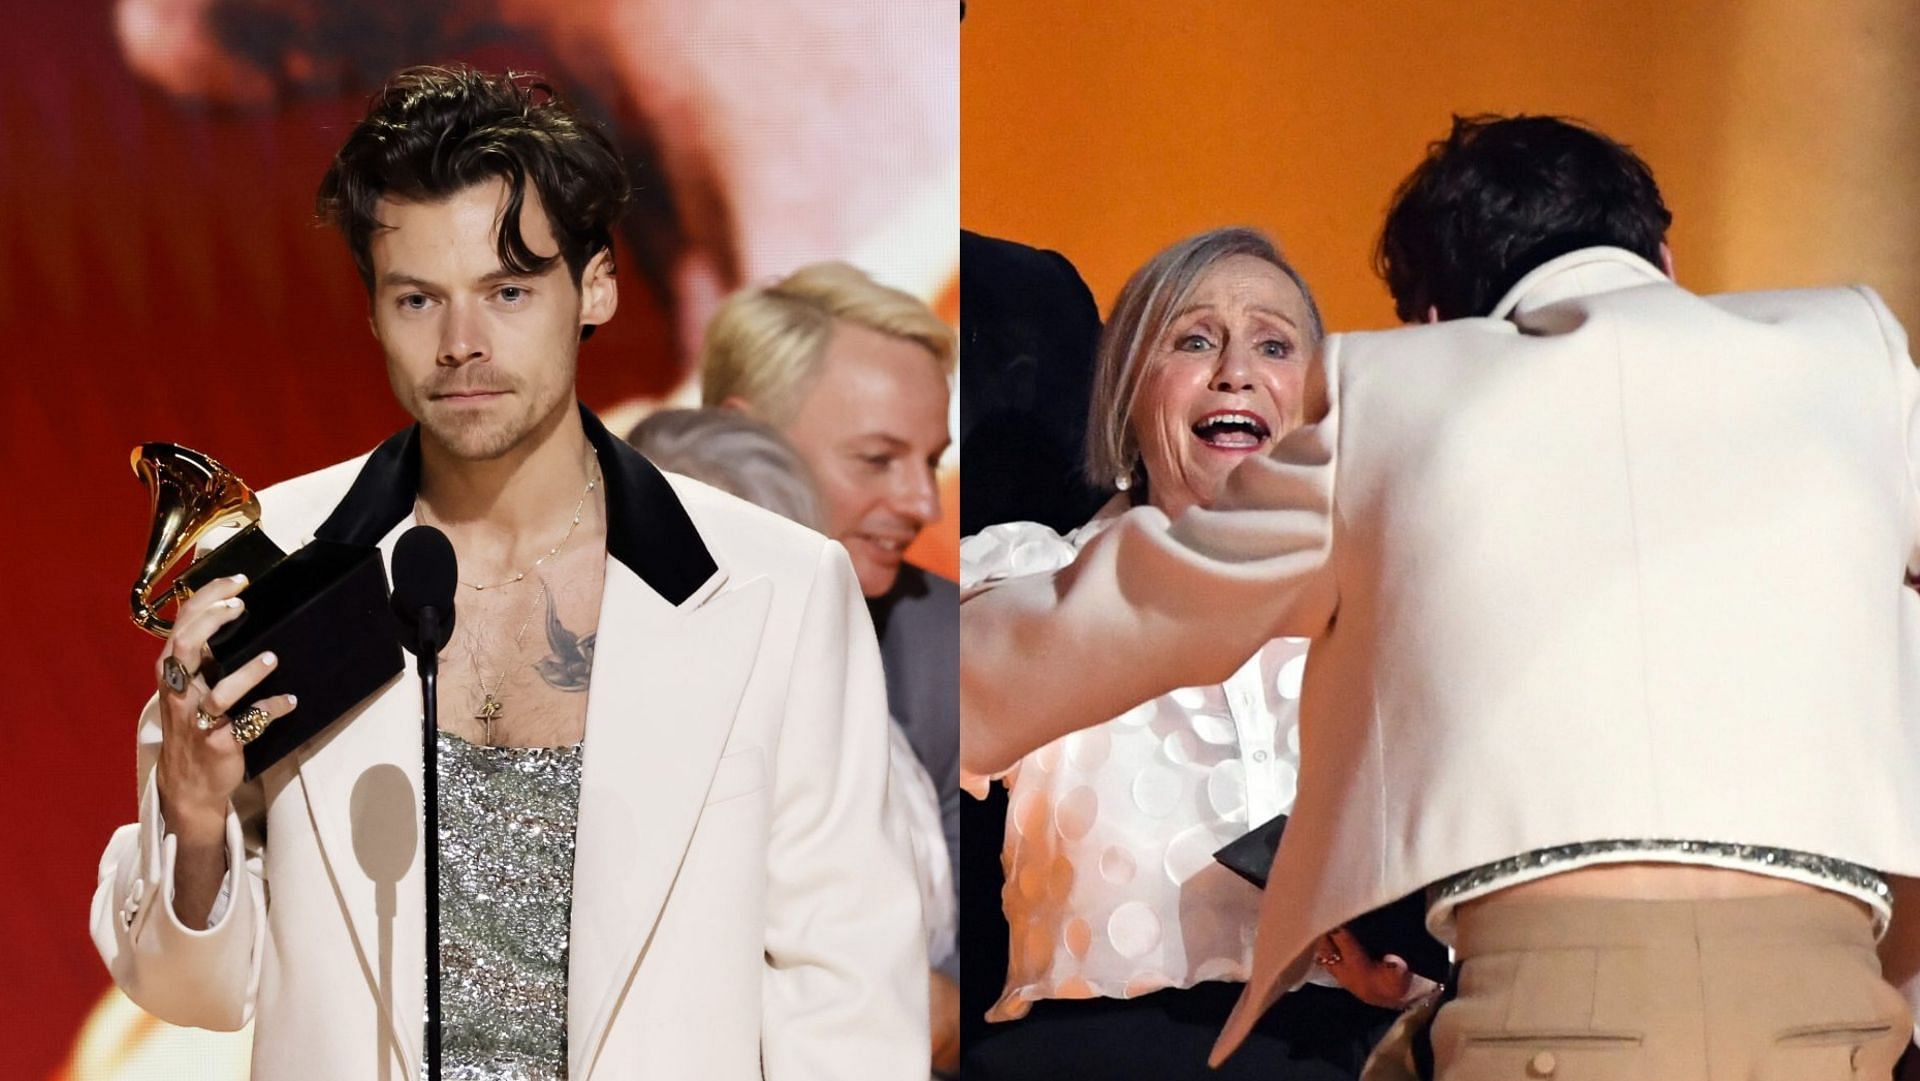 Harry Styles and Reina. (Image via Kevin Winter/Getty, @sunflwrkait/Twitter)